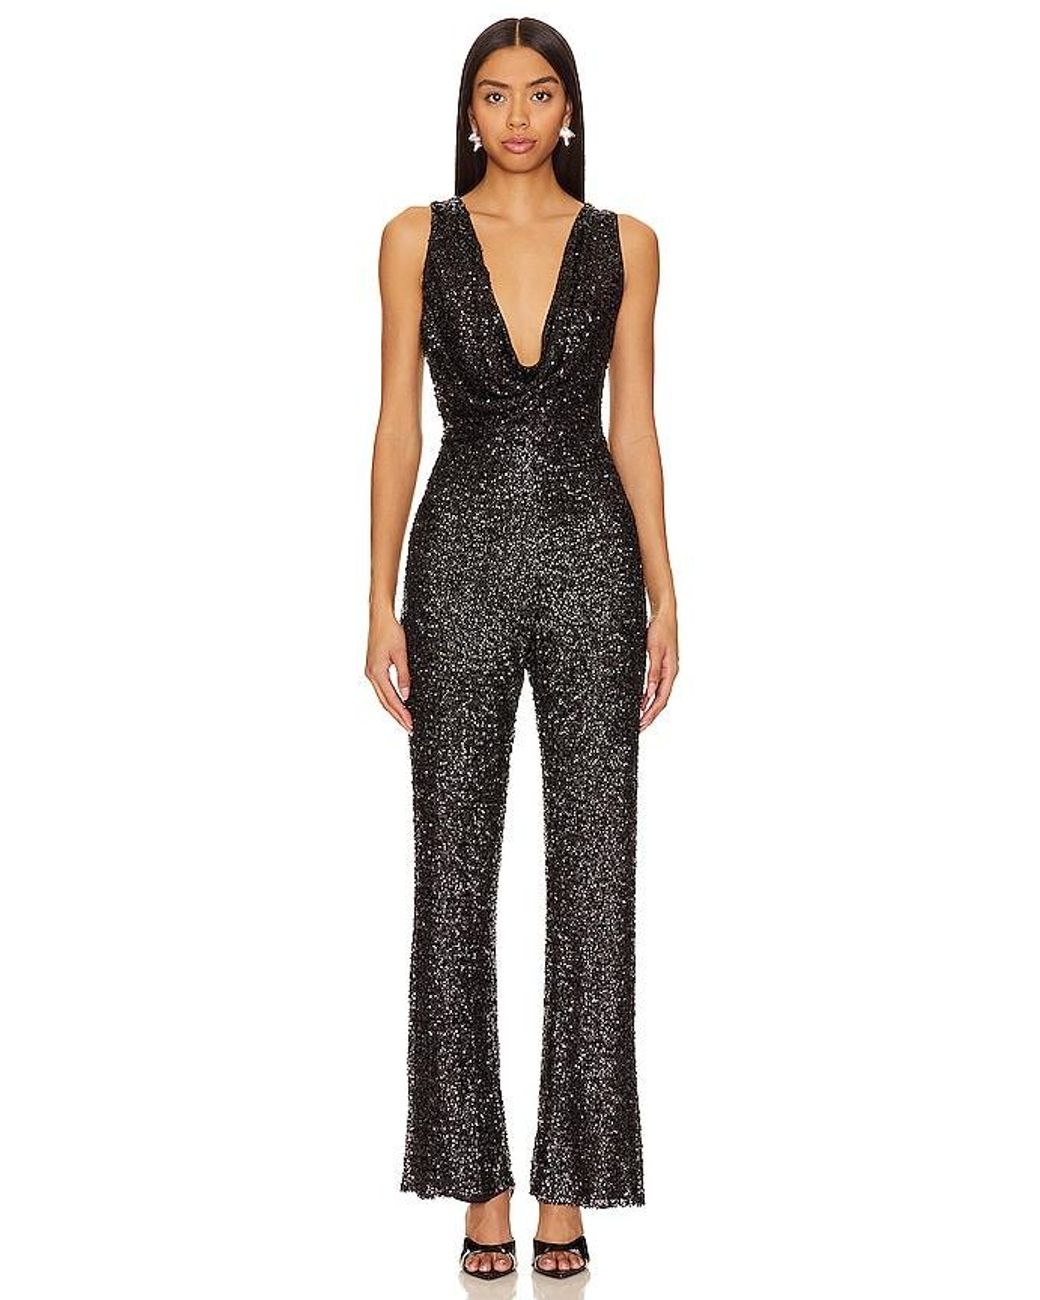 Buy Nbd Hastings Jumpsuit - White At 27% Off | Editorialist